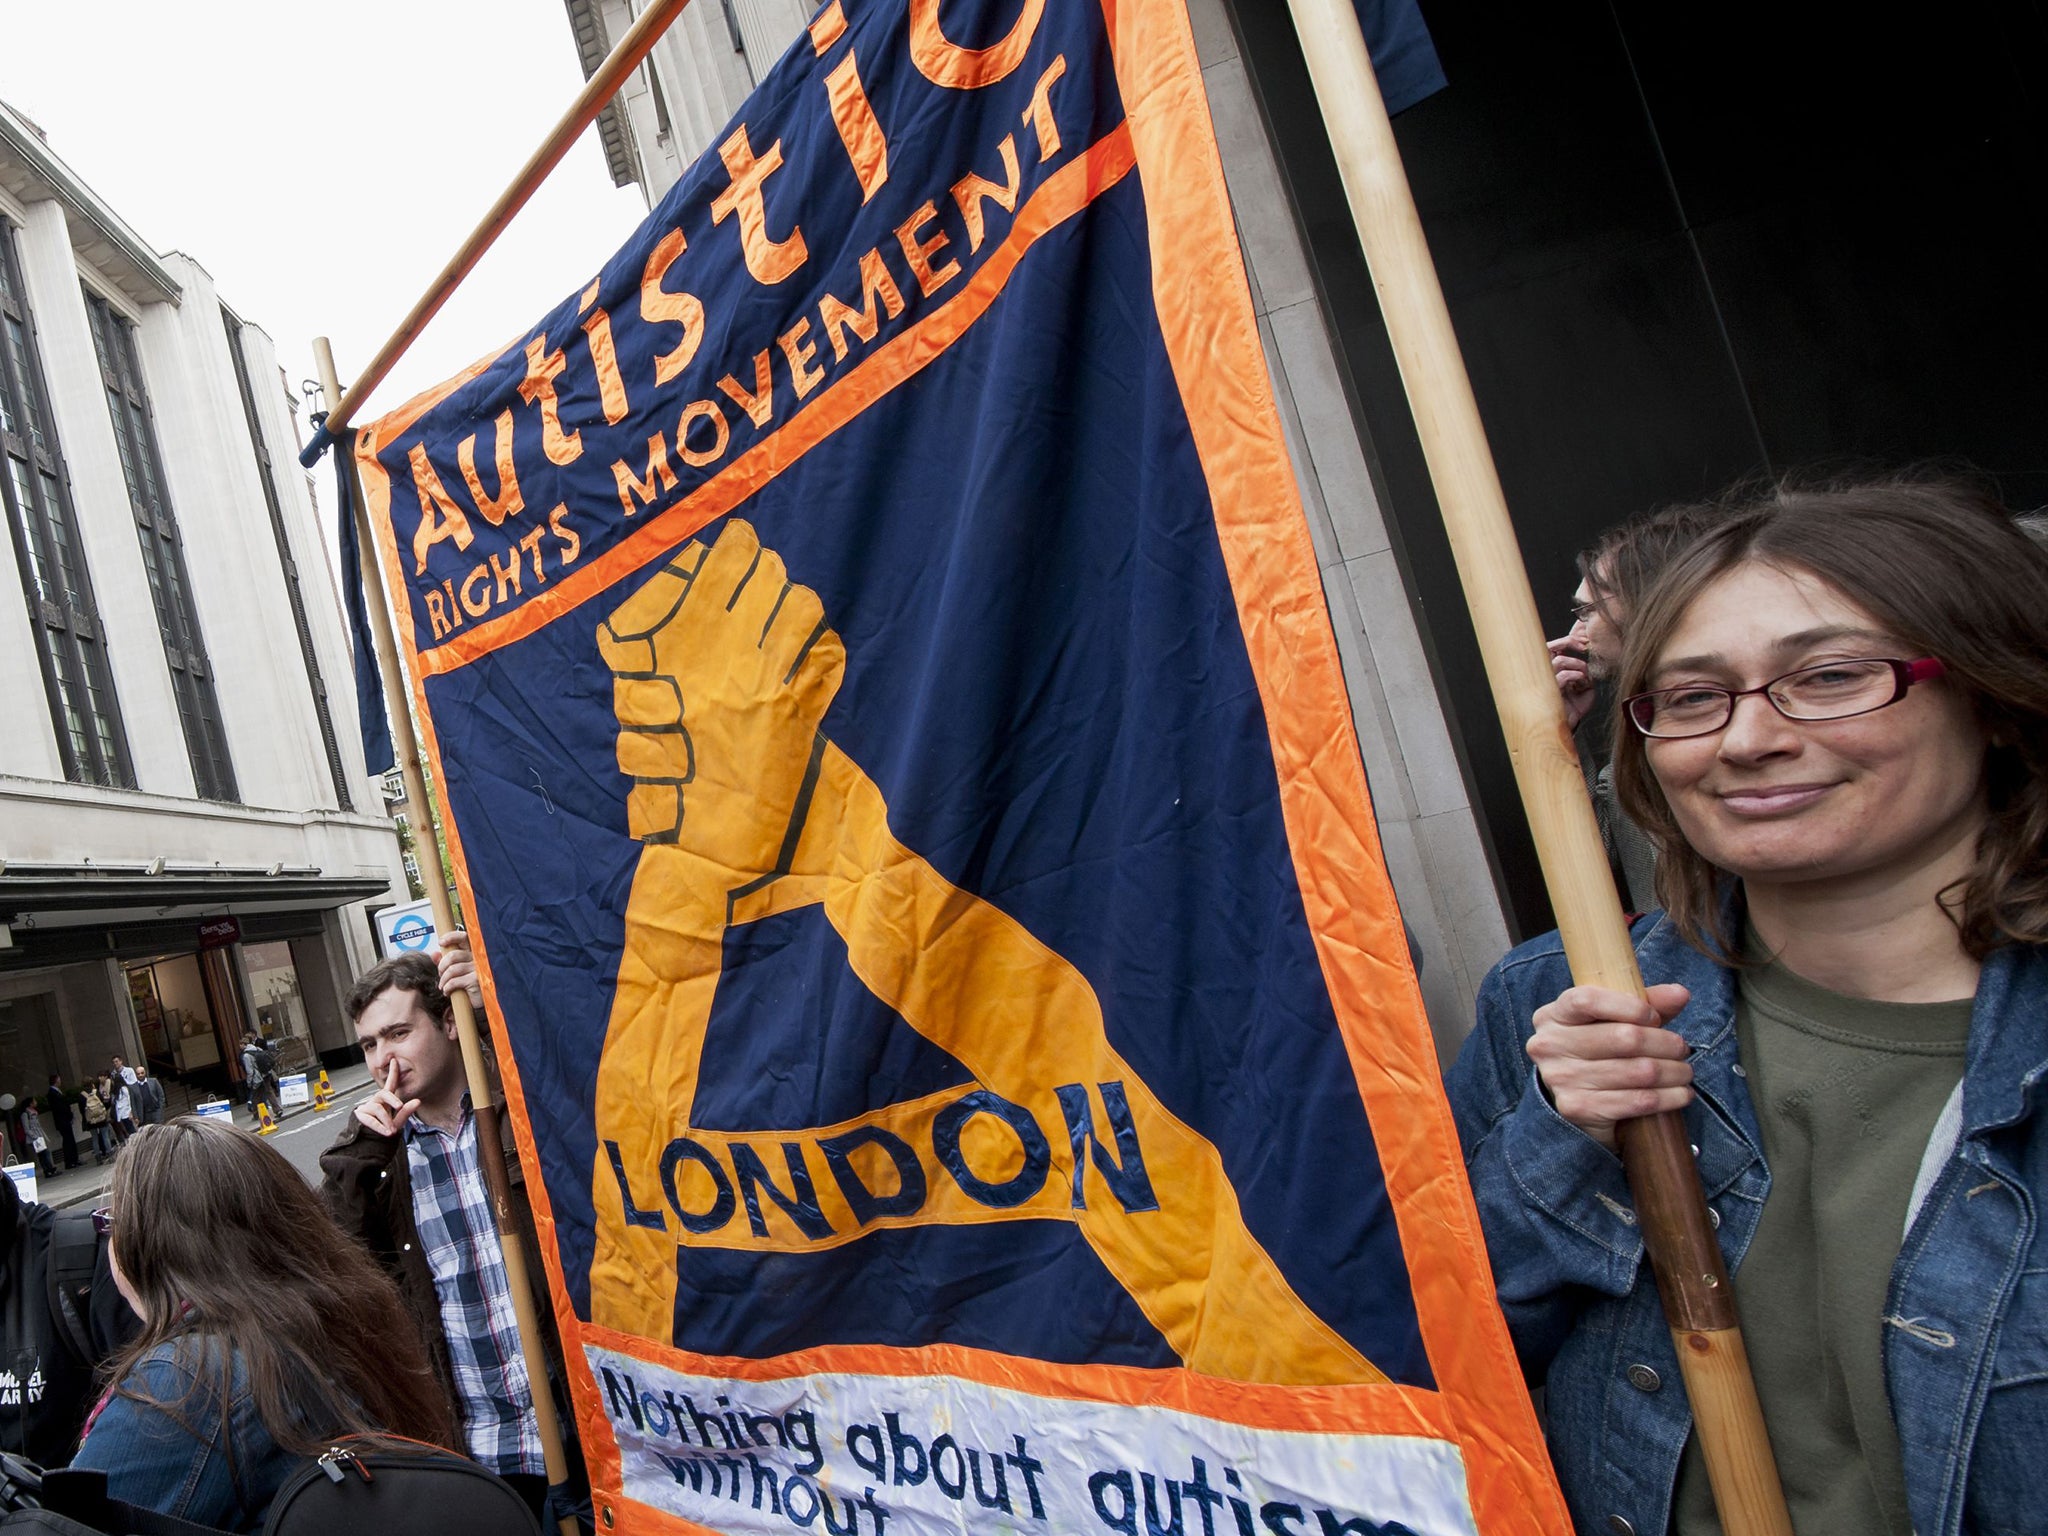 Campaigns for Autistic rights in London